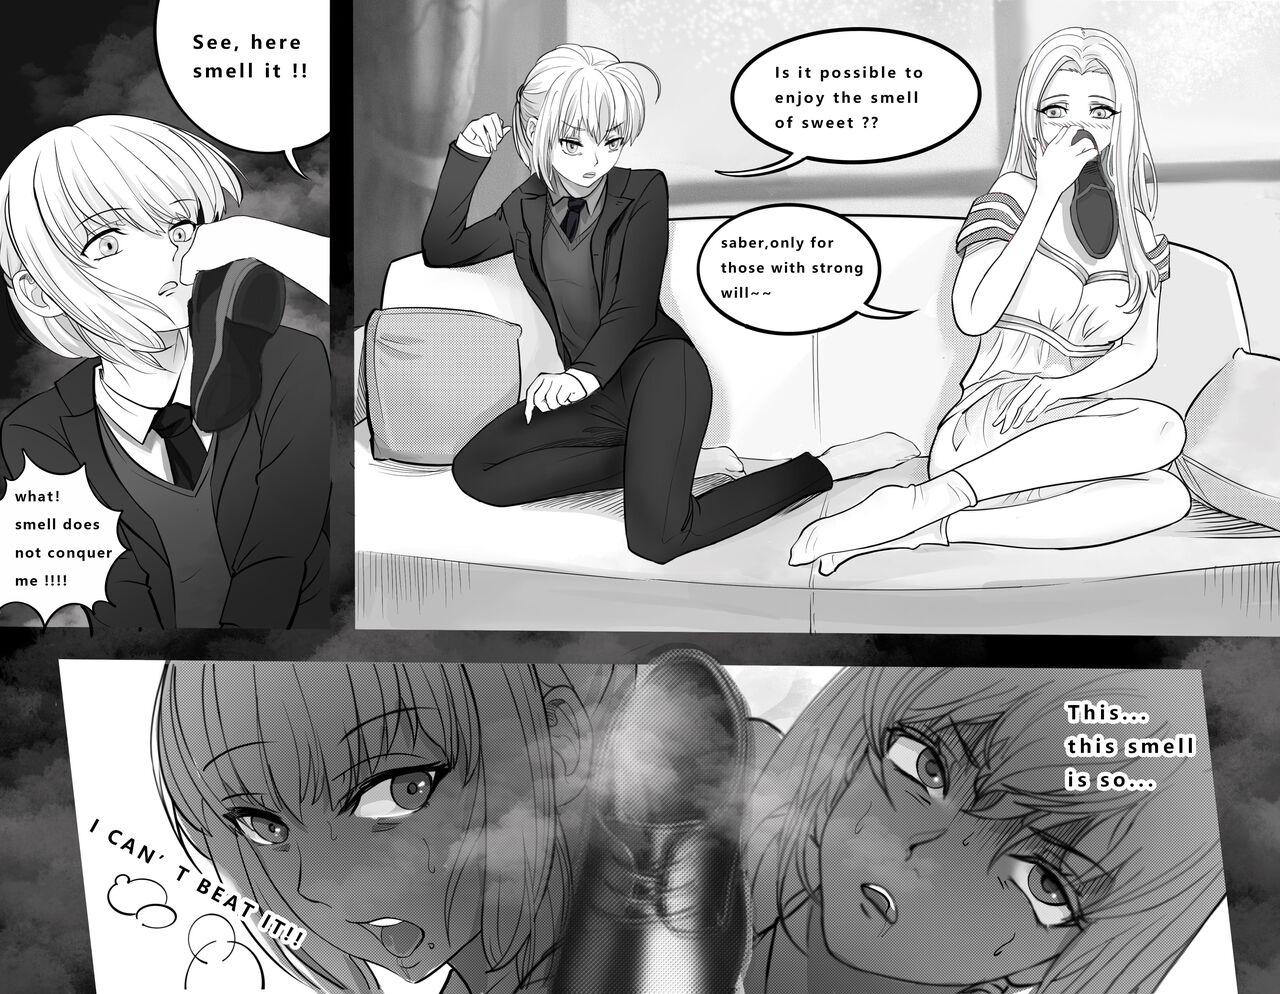 Balls FATE REQUEST ENGLISH VERSION - Fate stay night Cougars - Picture 1